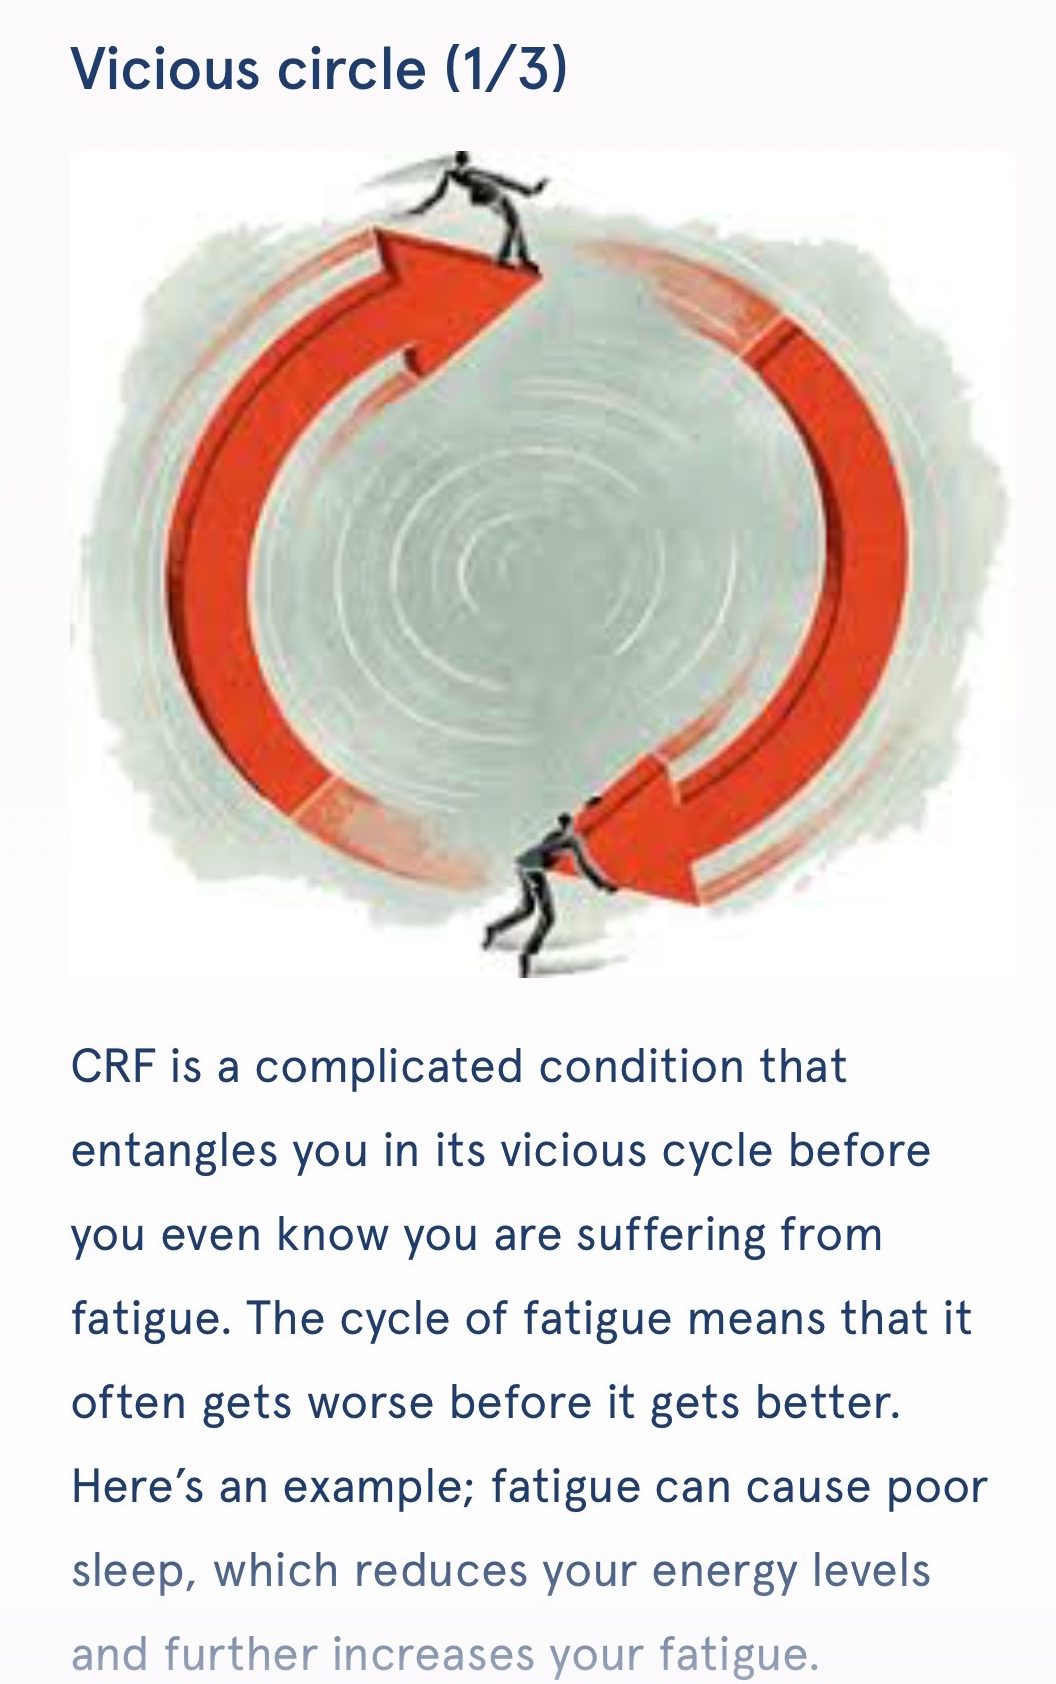 Managing Cancer Related Fatigue | CRF vicious cycle